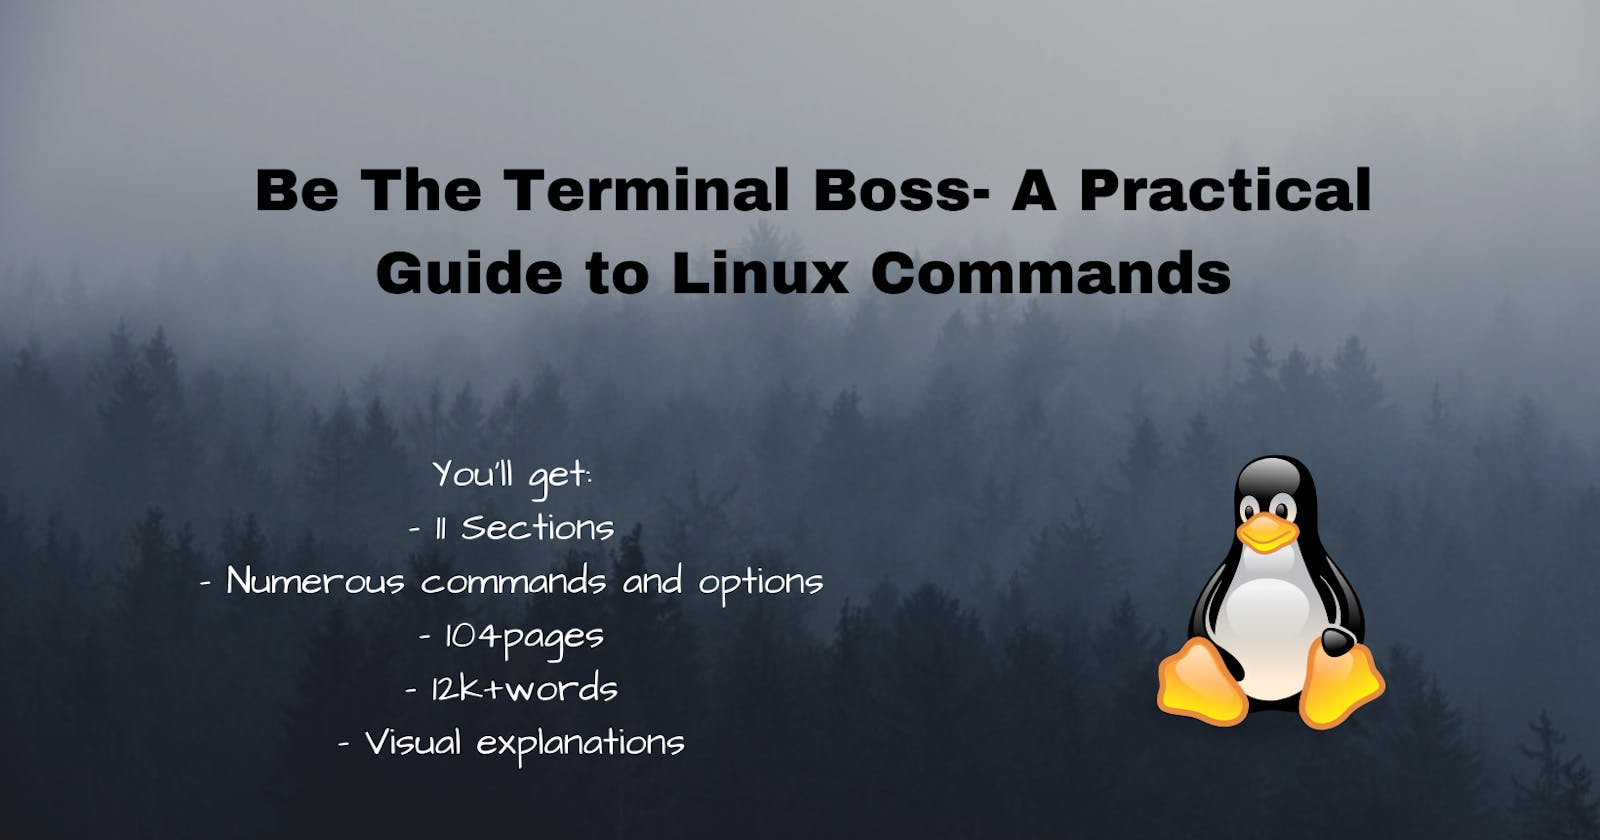 Introducing my first eBook: "Be The Terminal Boss"